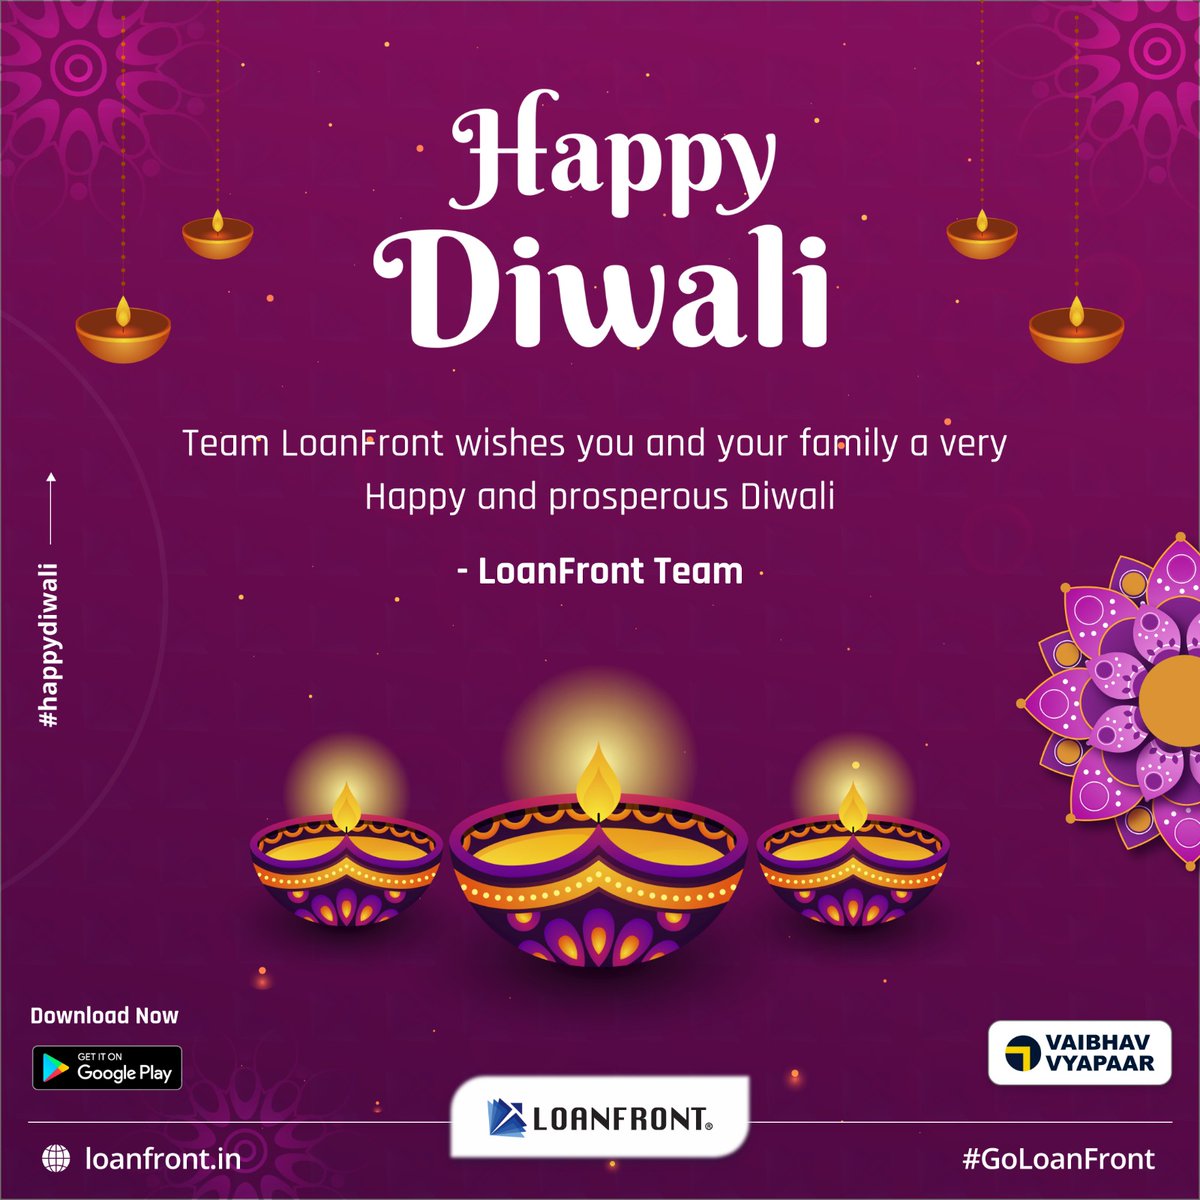 Wishing you a sparkling Diwali filled with the glow of love and the sparkle of success 💥🎆✨
#GoLoanFront #loanservices #festivevibes #subhdiwali #financialservices #quickloans #loanfront #pocketfriendly #easyloan